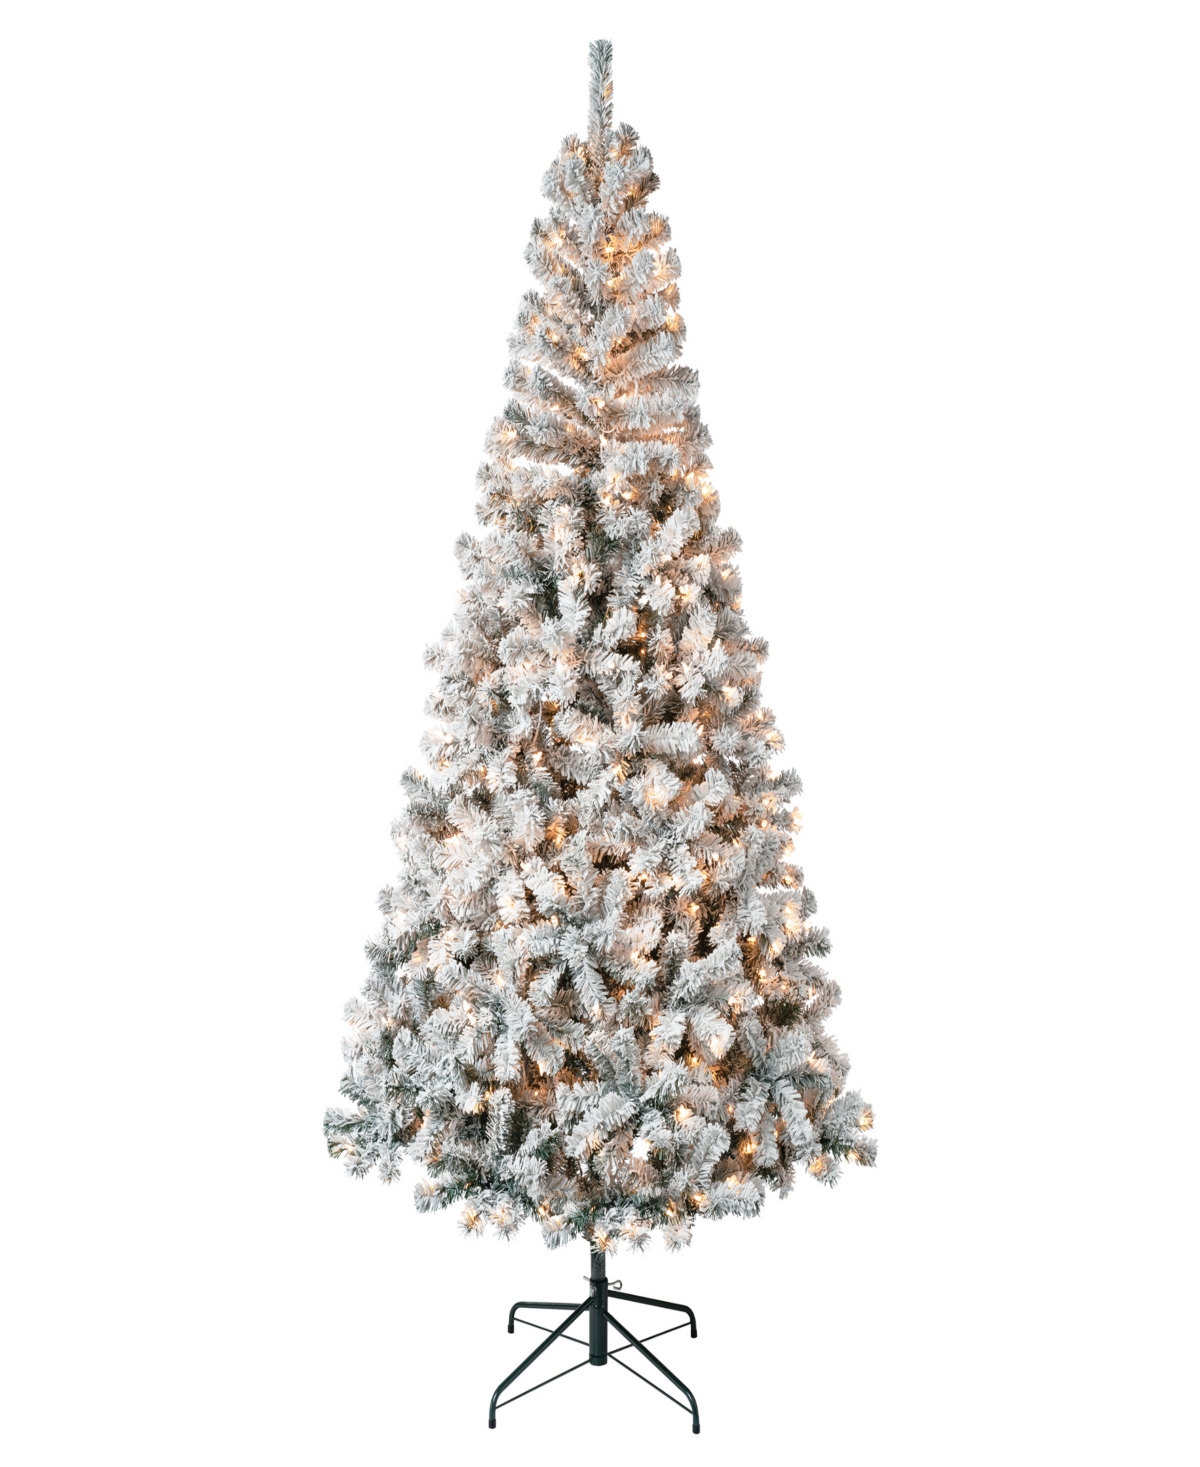 National Tree Company First Traditions 7.5' Acacia Flocked Tree With Clear Lights In Green